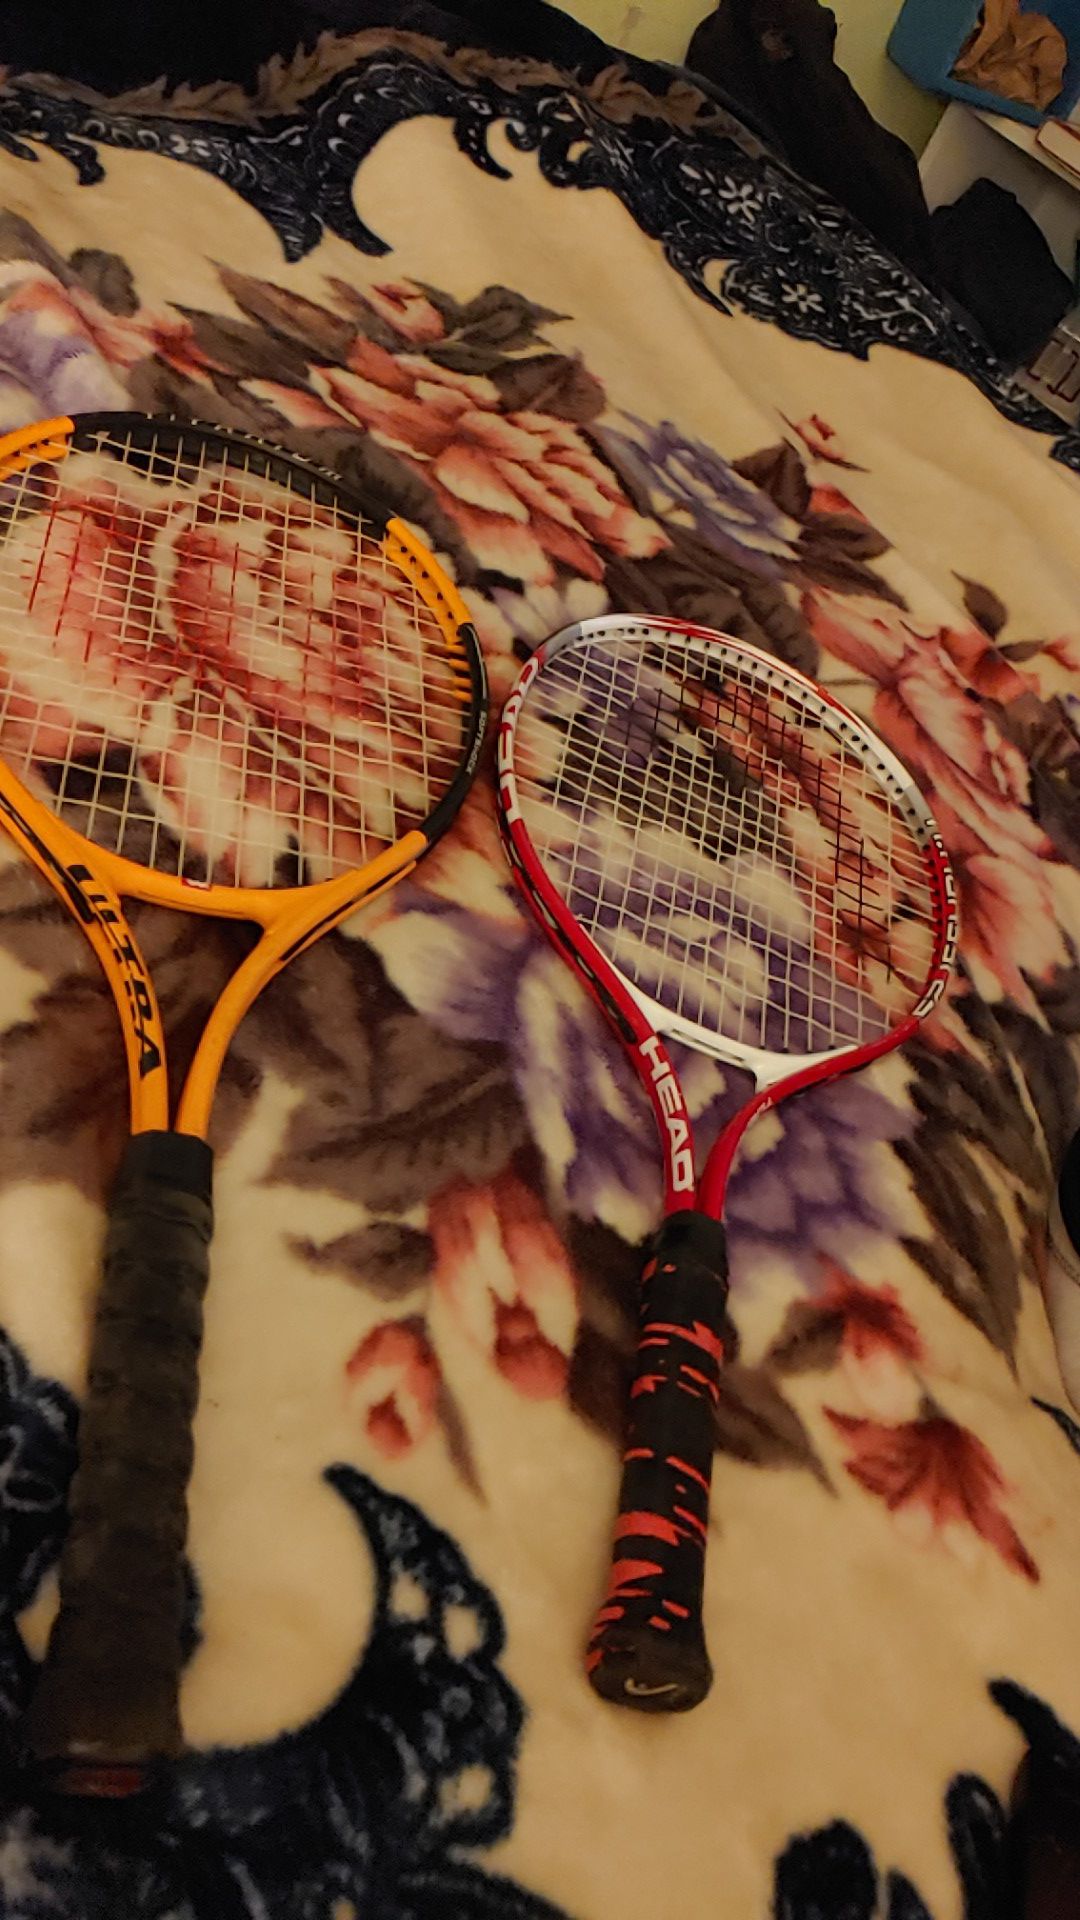 Two tennis rackets $5 for both